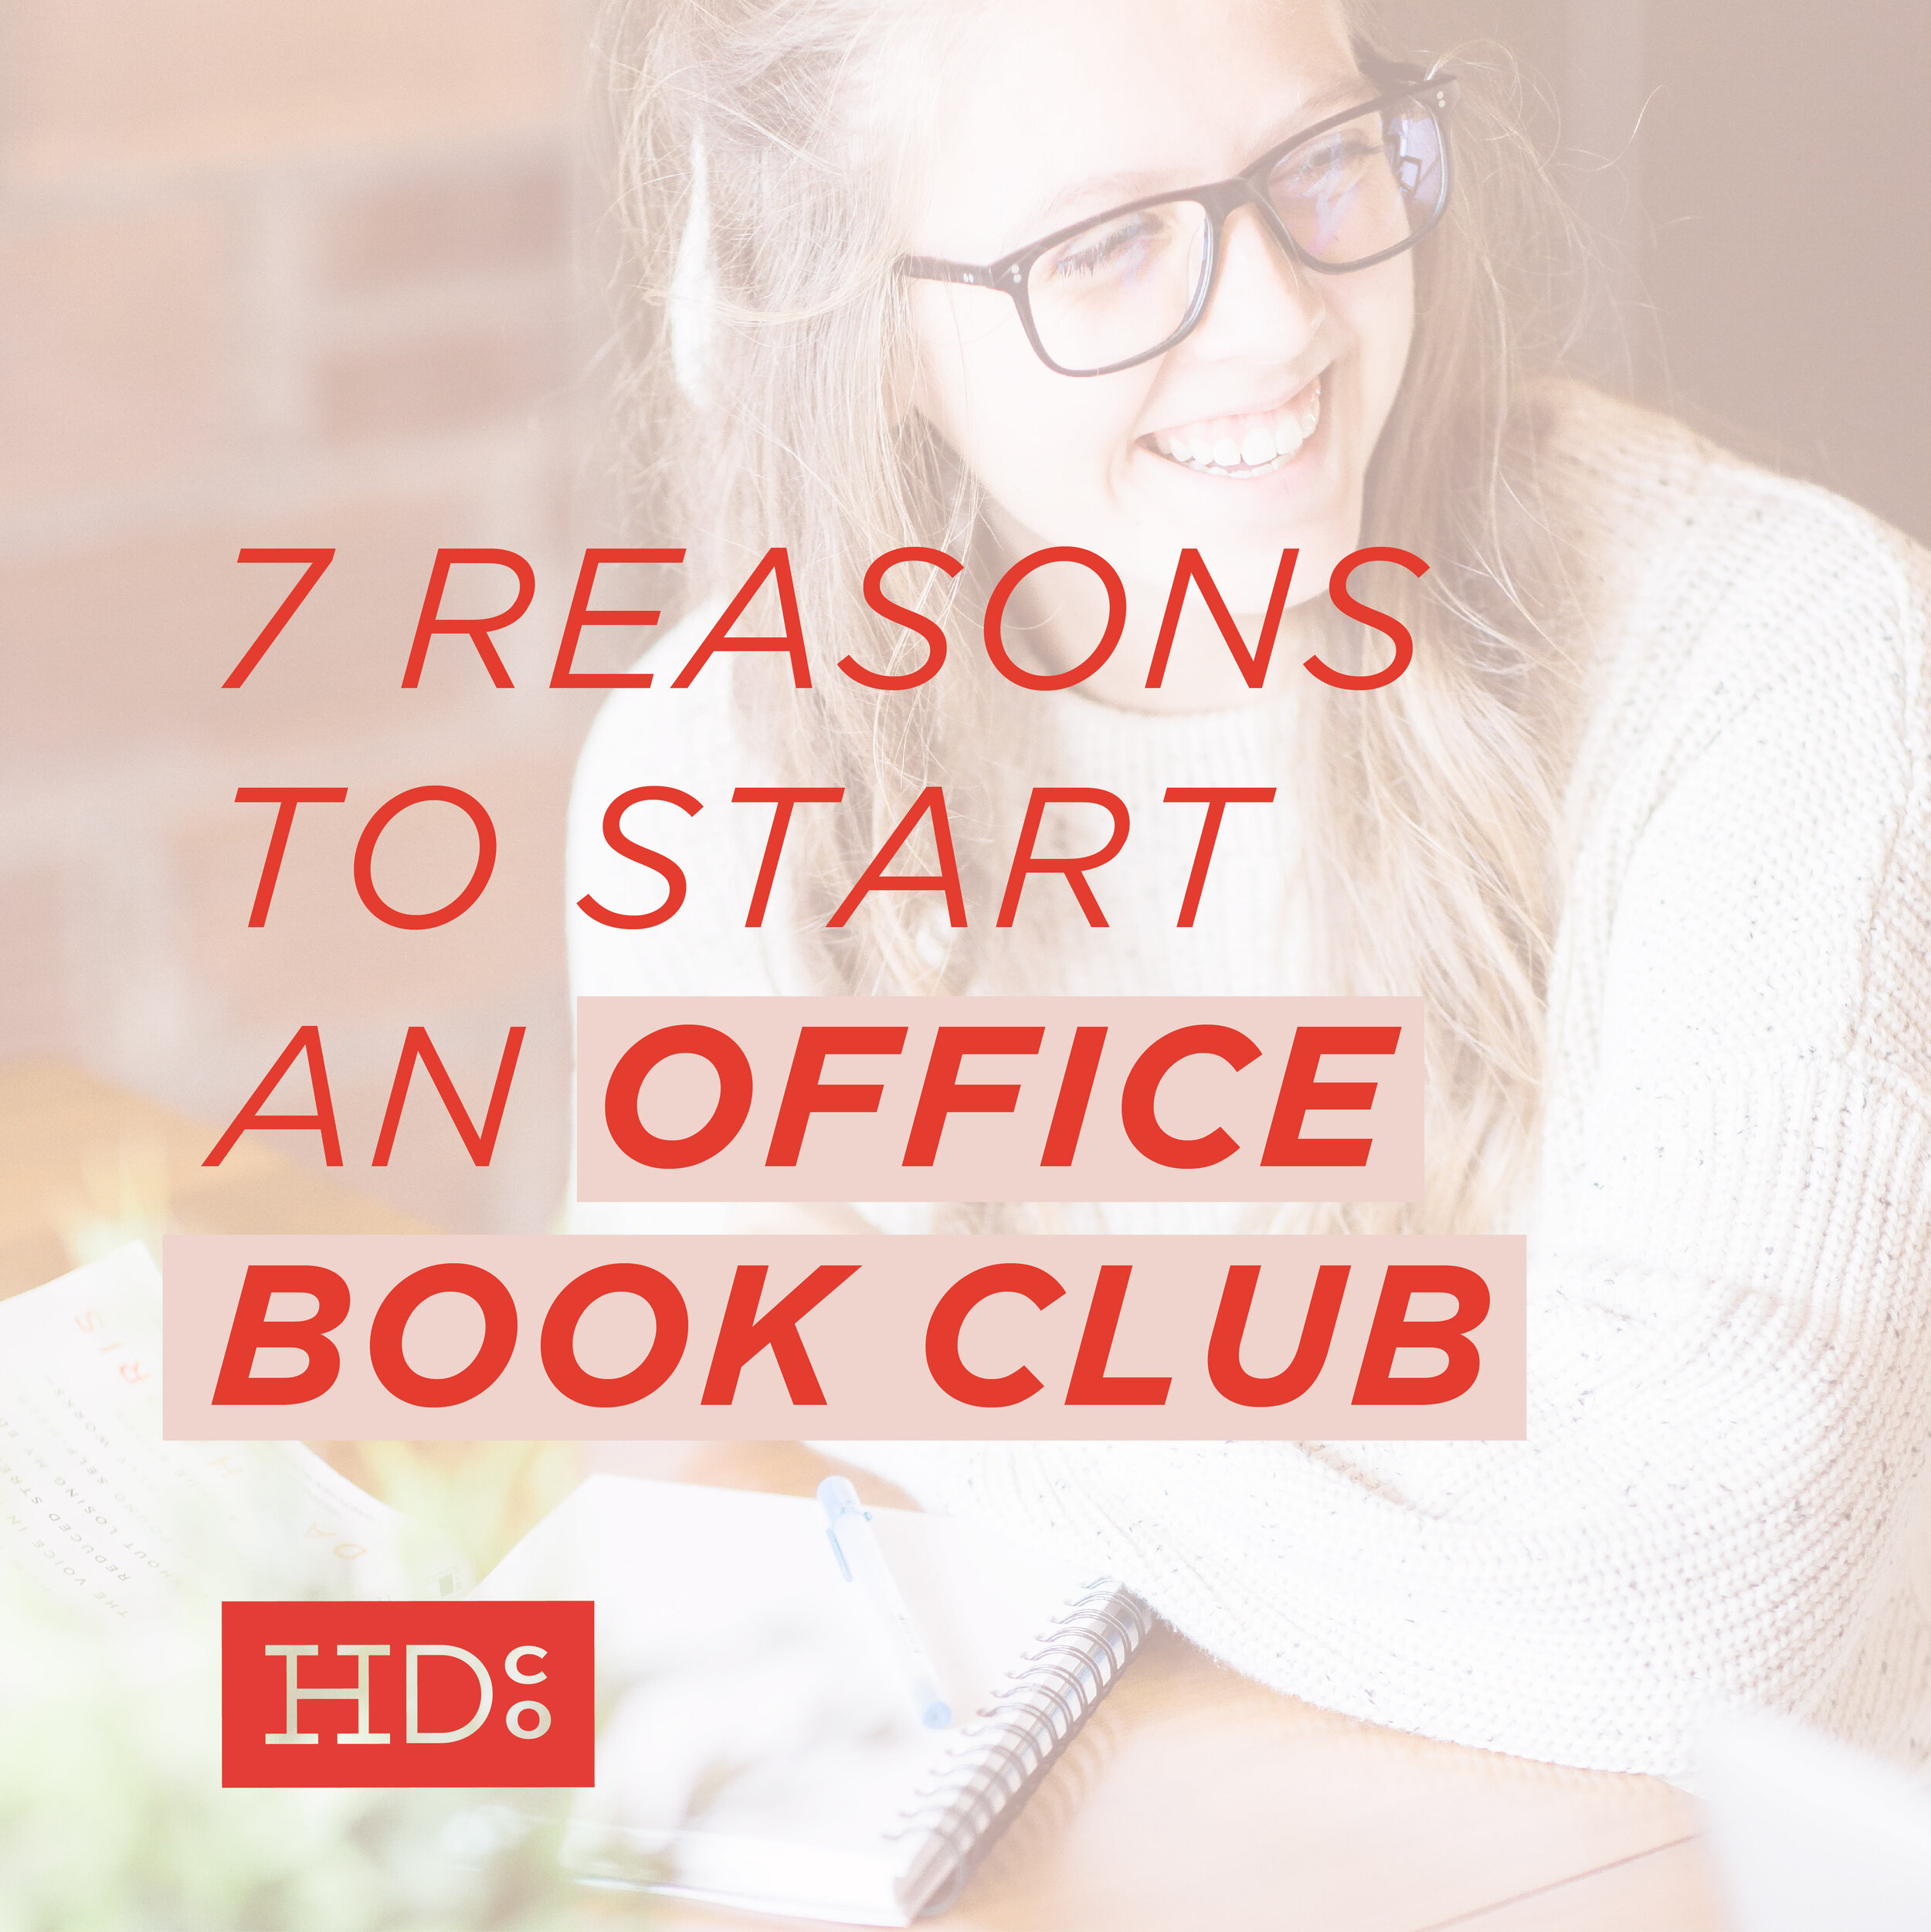 Blog post about starting an office book club